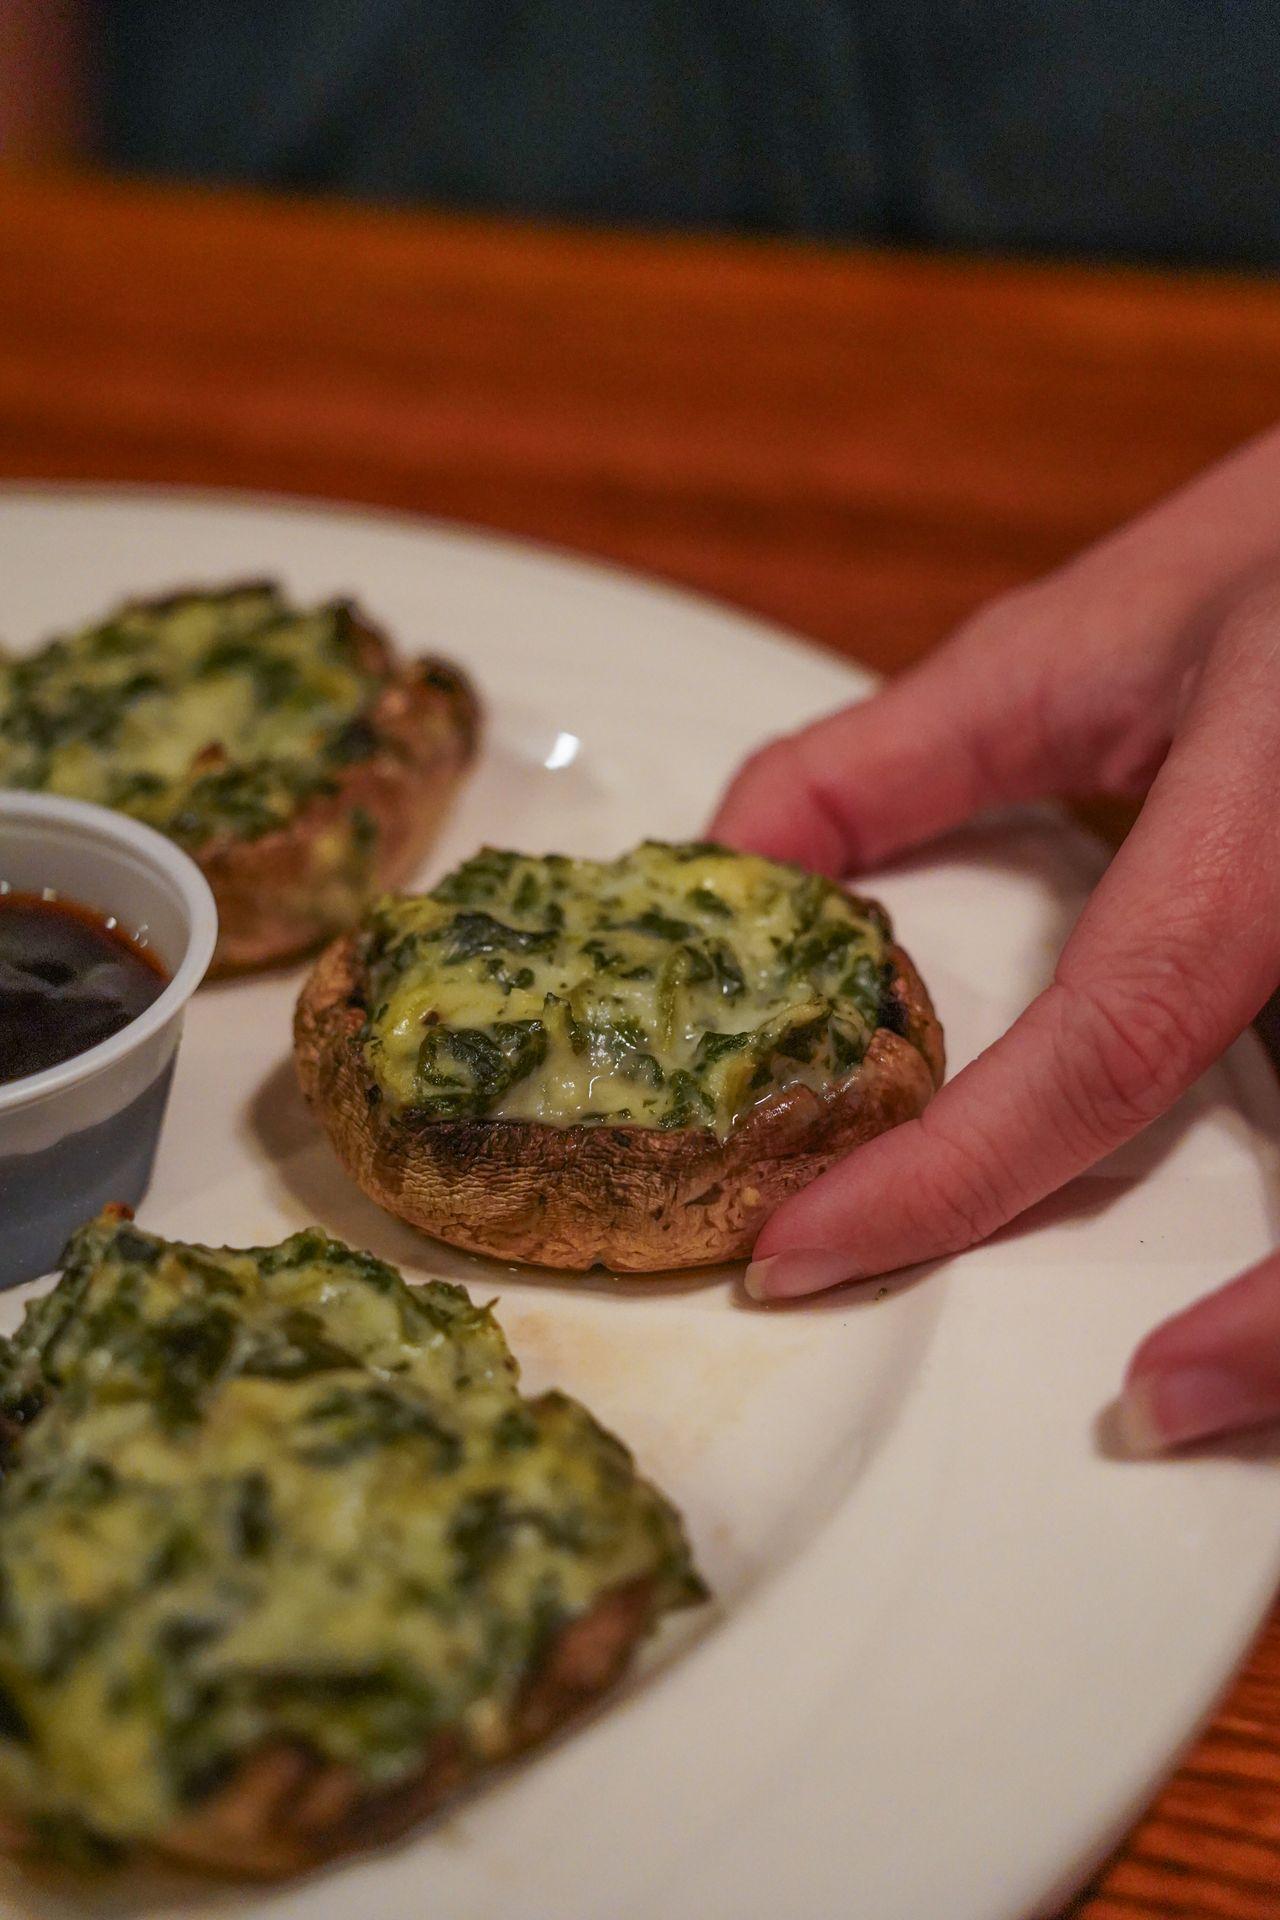 A close up view of a hang picking up a spinach artichoke stuffed mushroom from P J Harrigan's in State College.